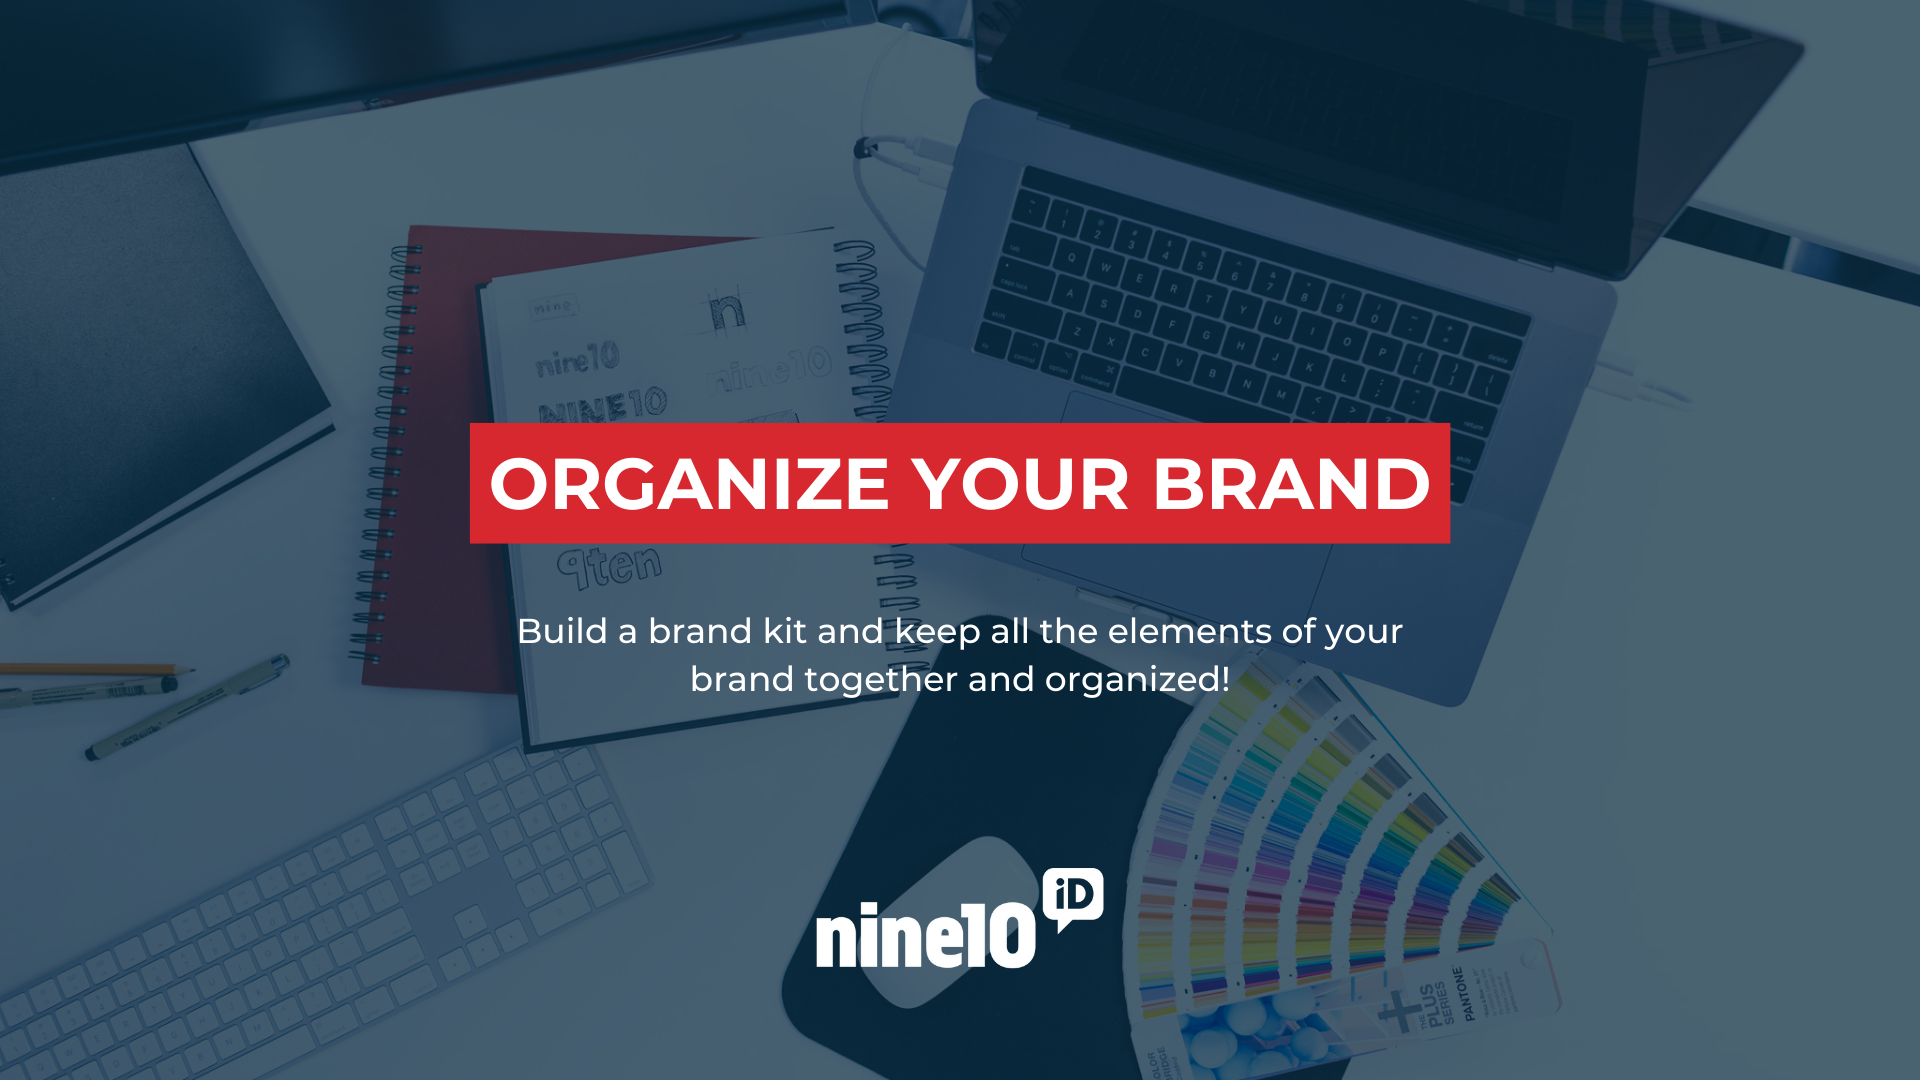 Organize-your-brand-use-a-brand-kit